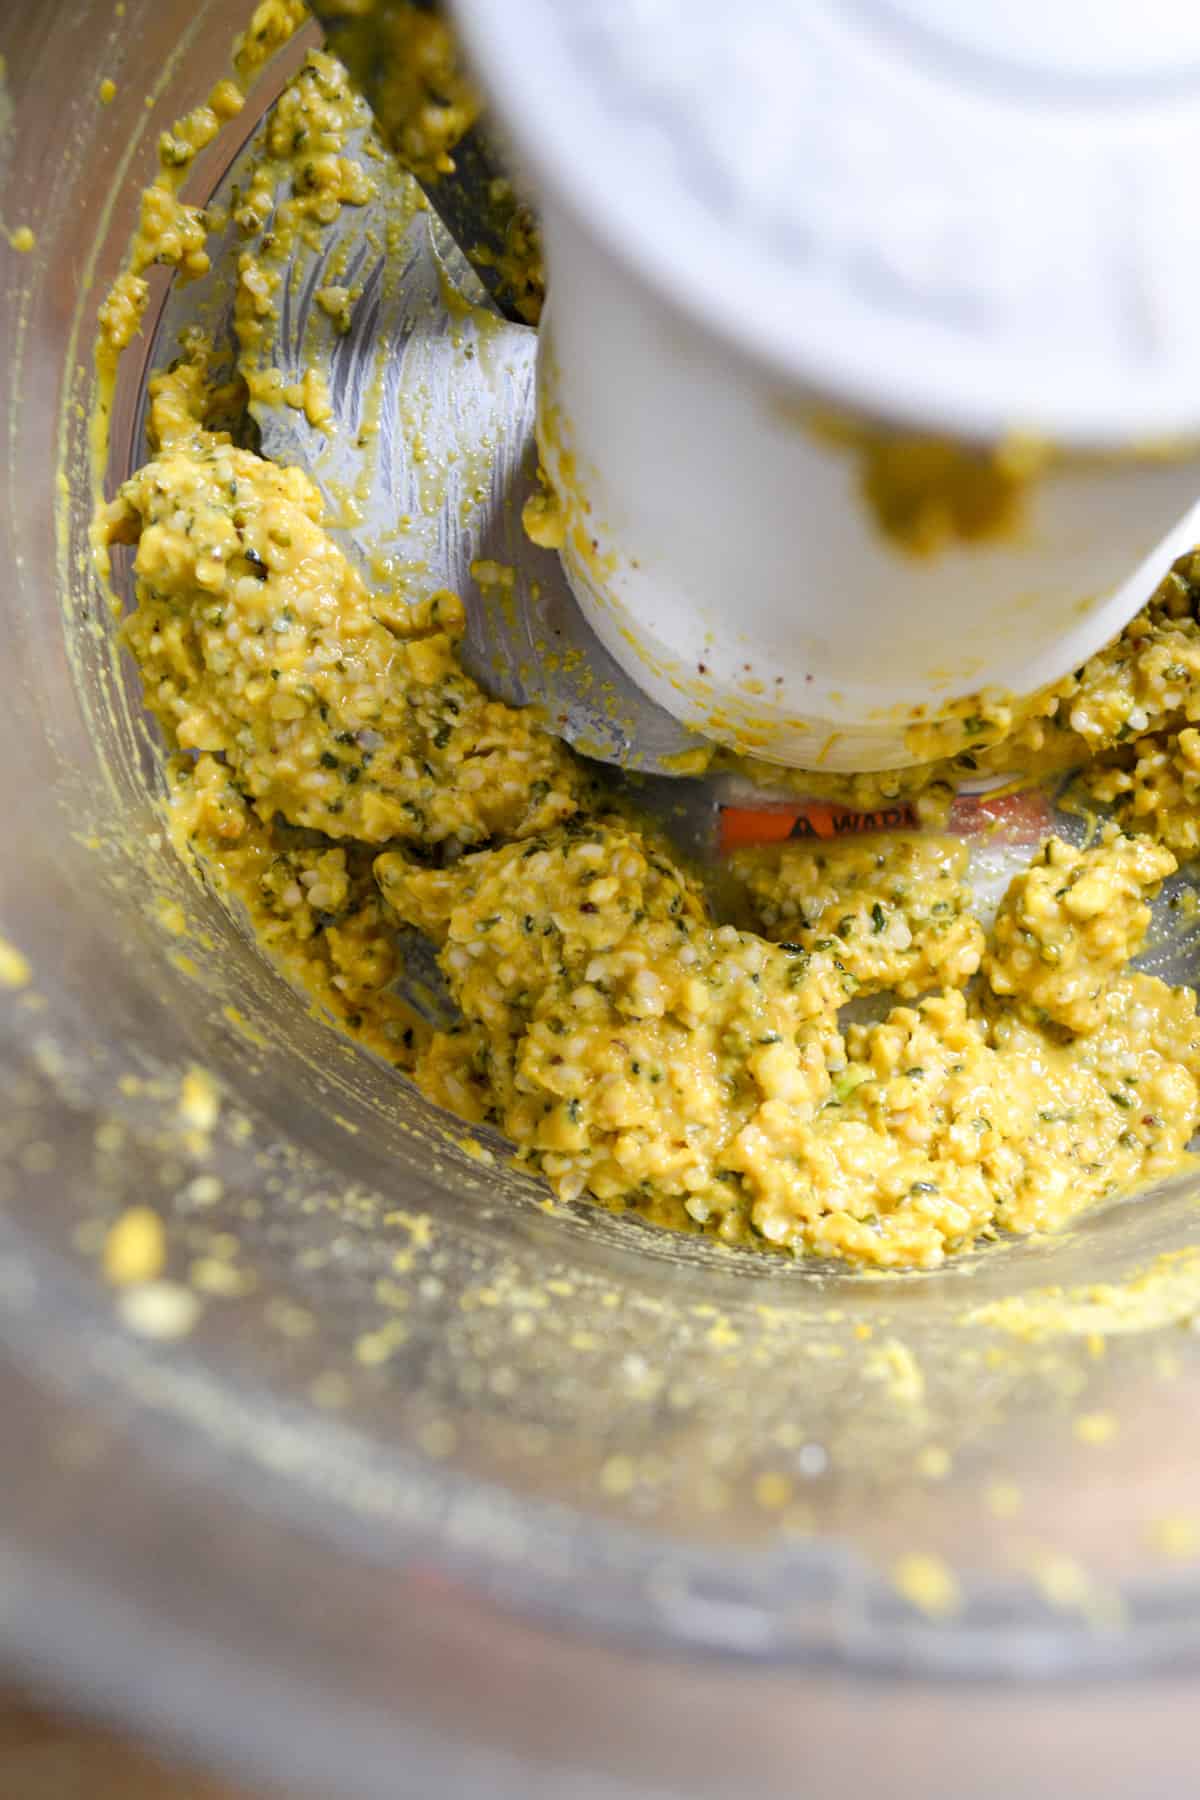 the hemp seeds, lemon juice, garlic and nutritional yeast pulsed up into a paste in a food processor.